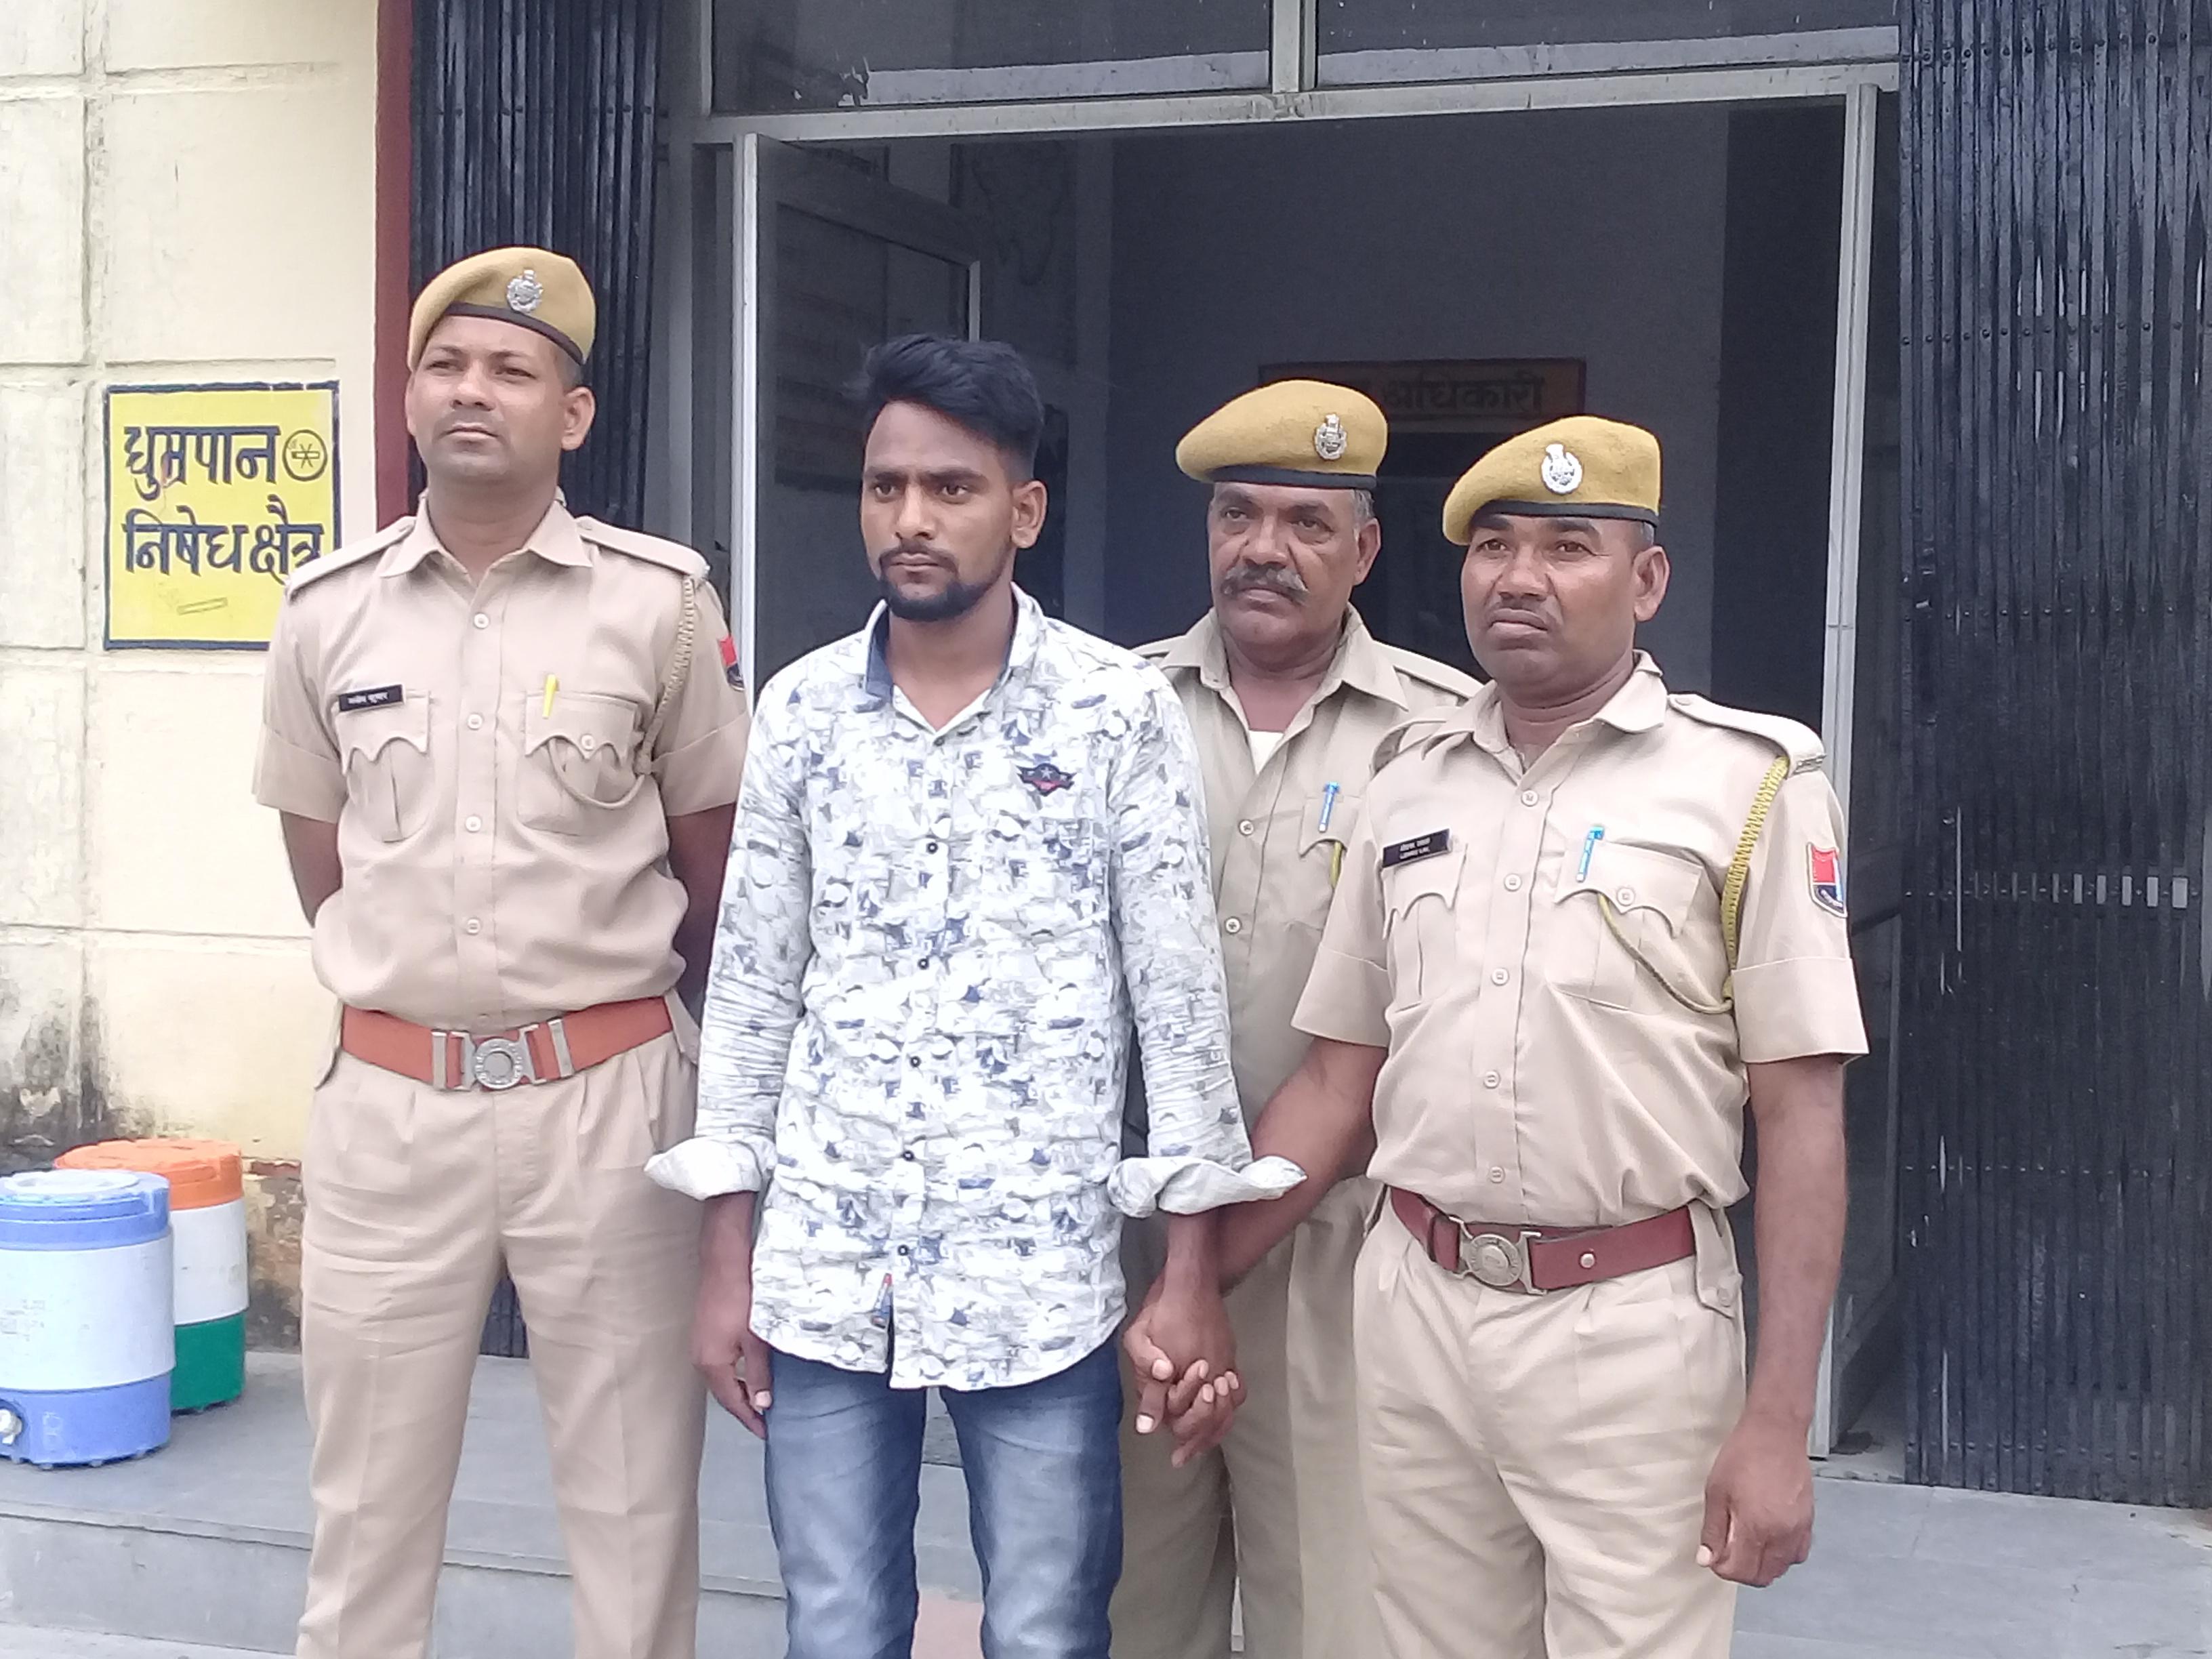 BJP leader's son rape attempt arrested in jail on charges in bhilwara